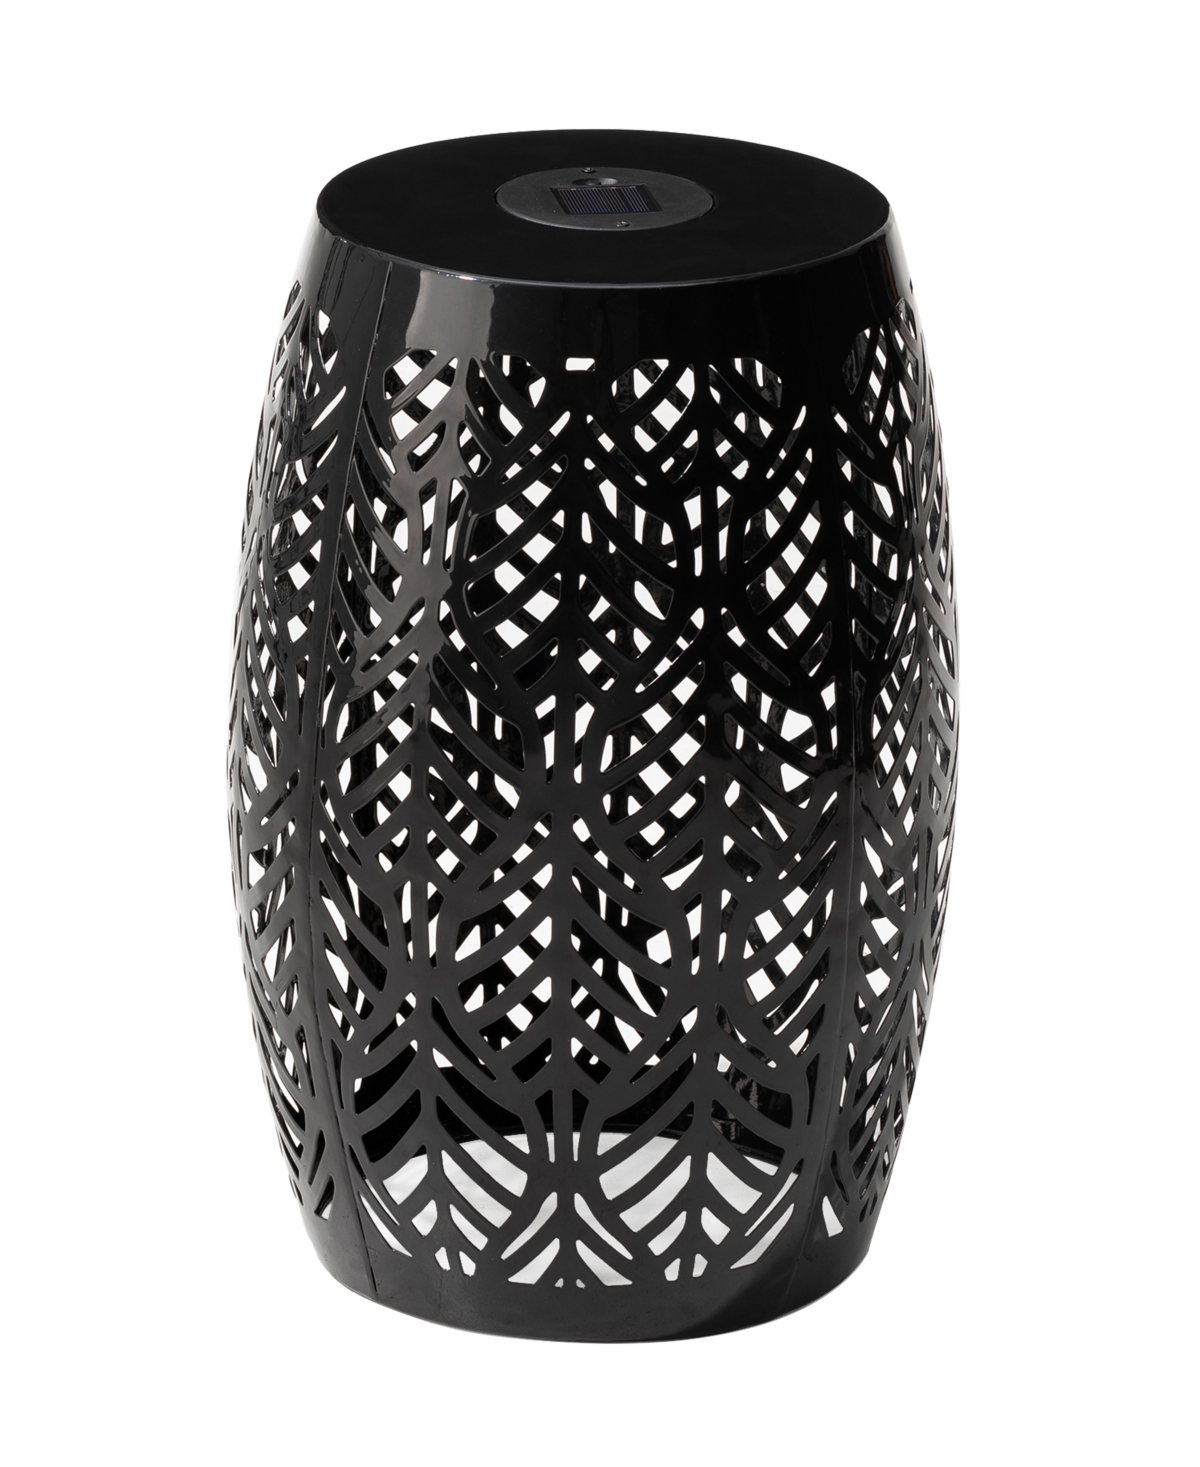 Multi-Functional Black Iron Leaf Pattern Solar Powered Garden Stools or Planter Stand - Black